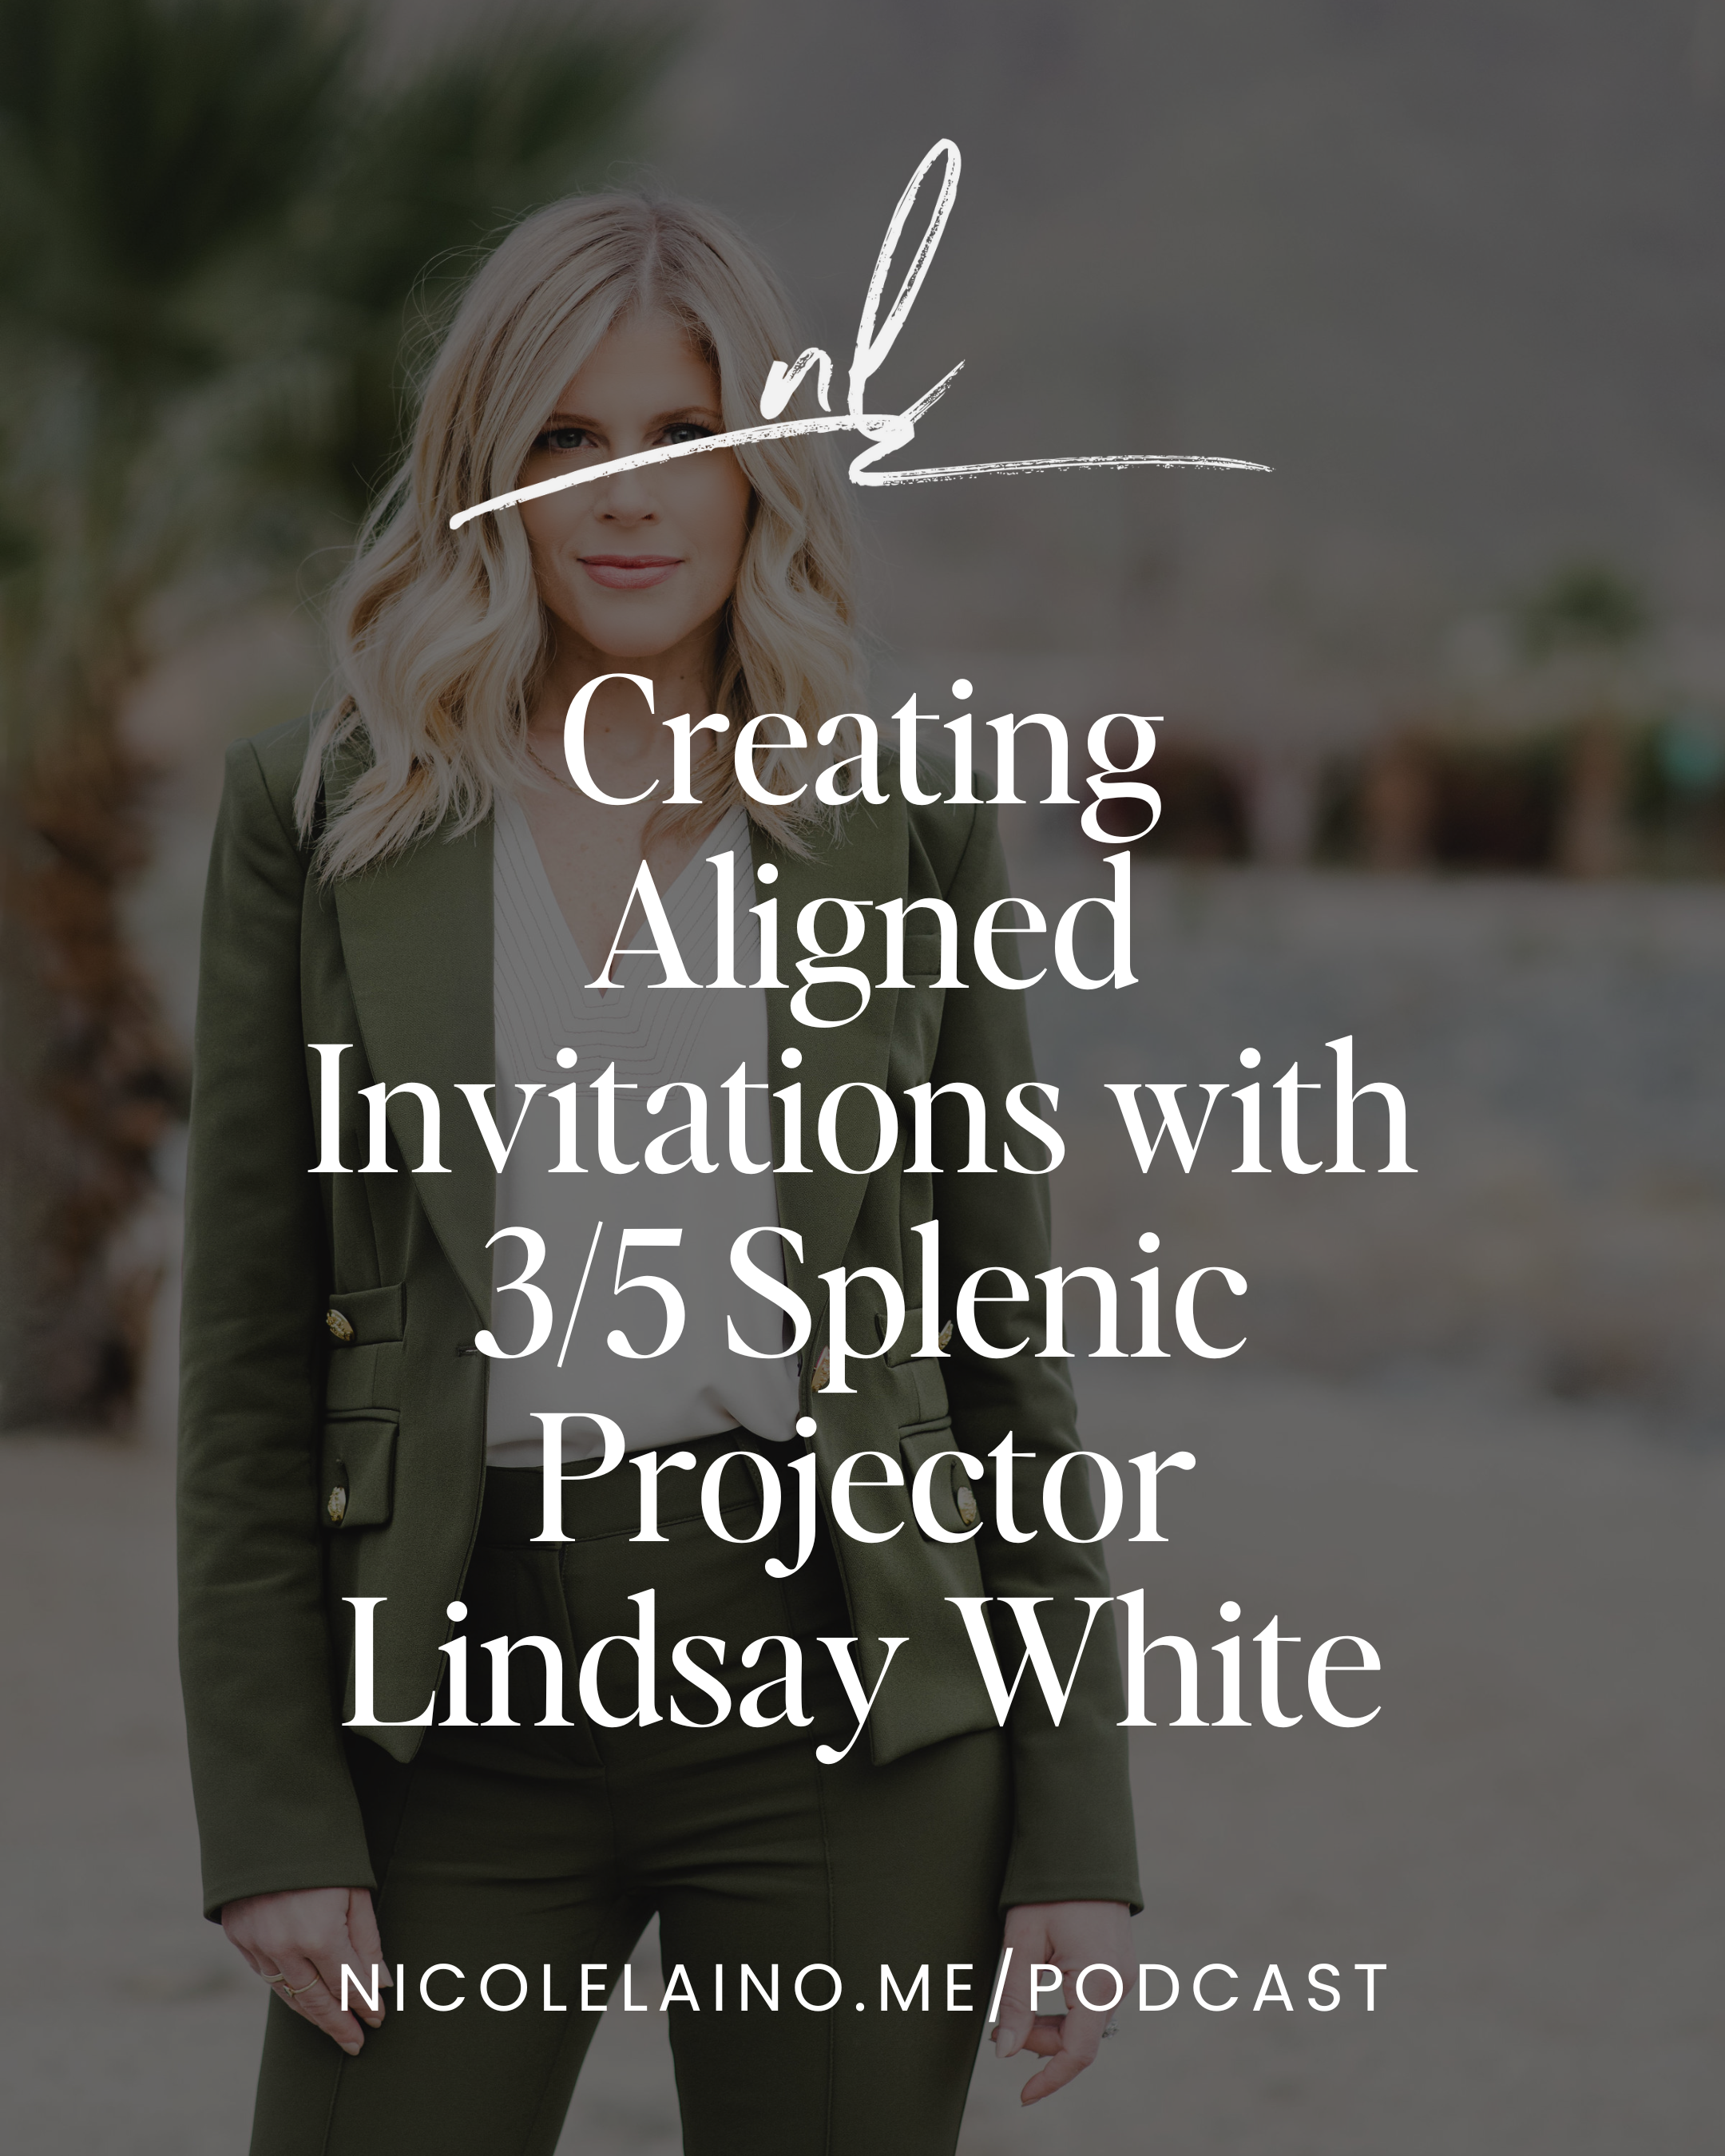 Creating Aligned Invitations with 3/5 Splenic Projector Lindsay White